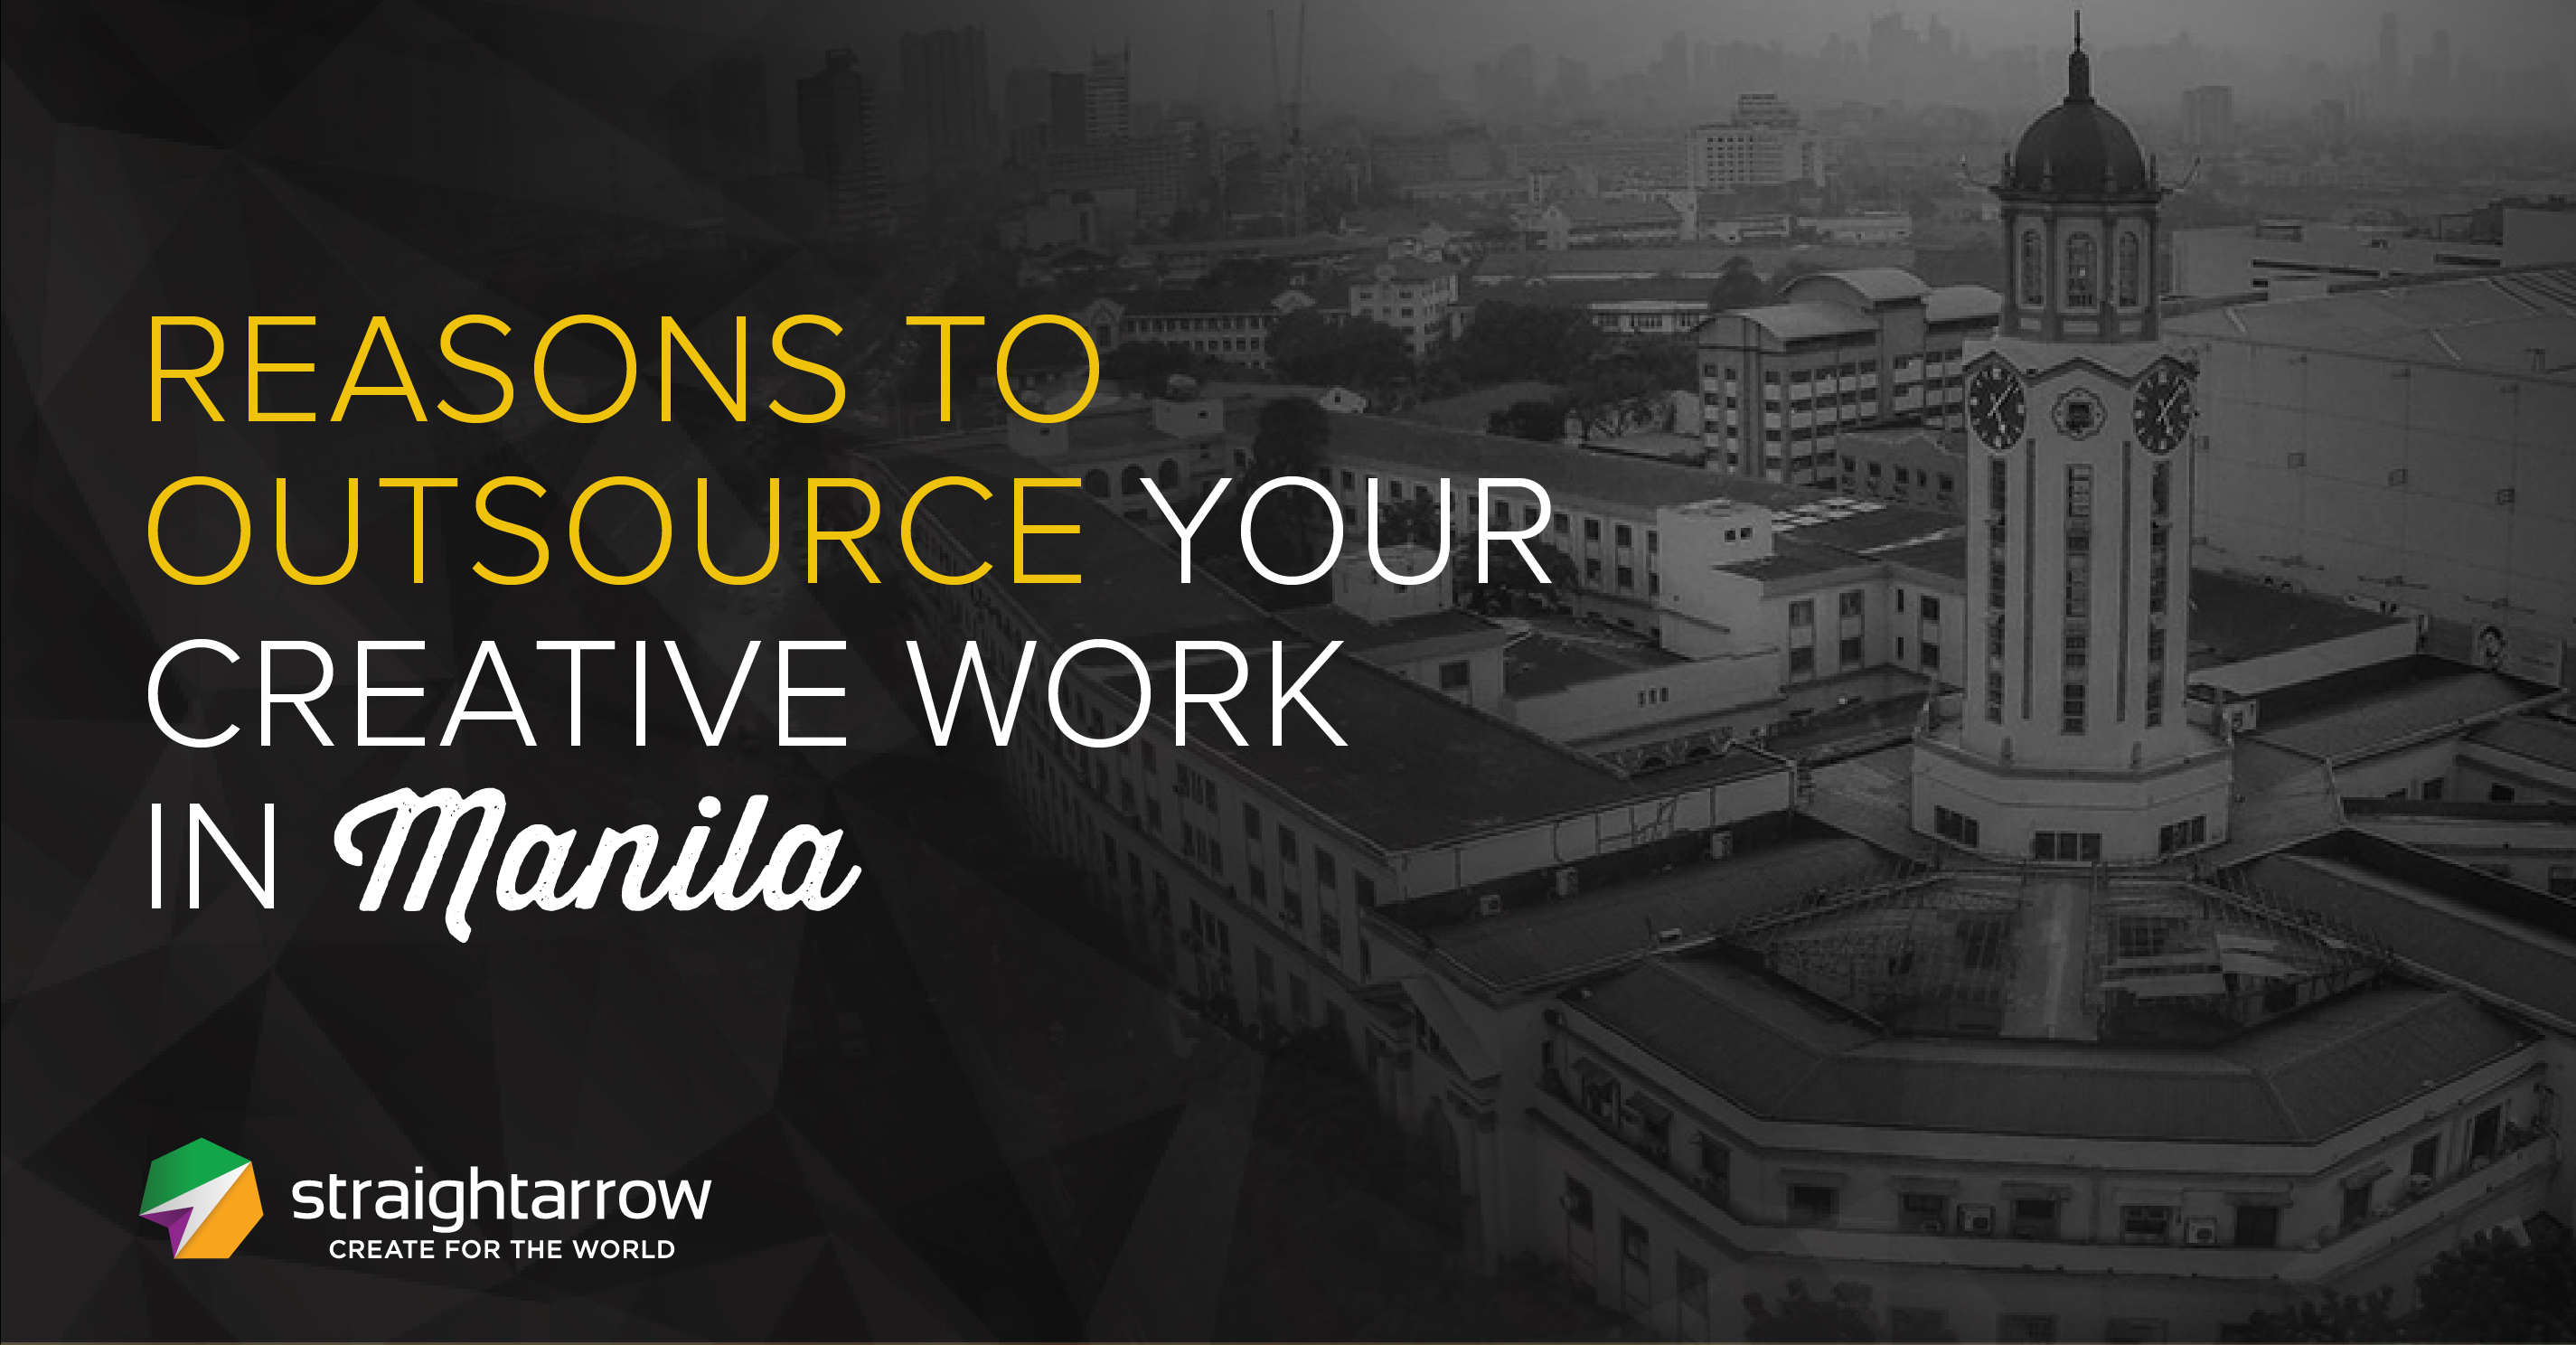 Reasons to Outsource Your Creative Work in Manila [Infographic]